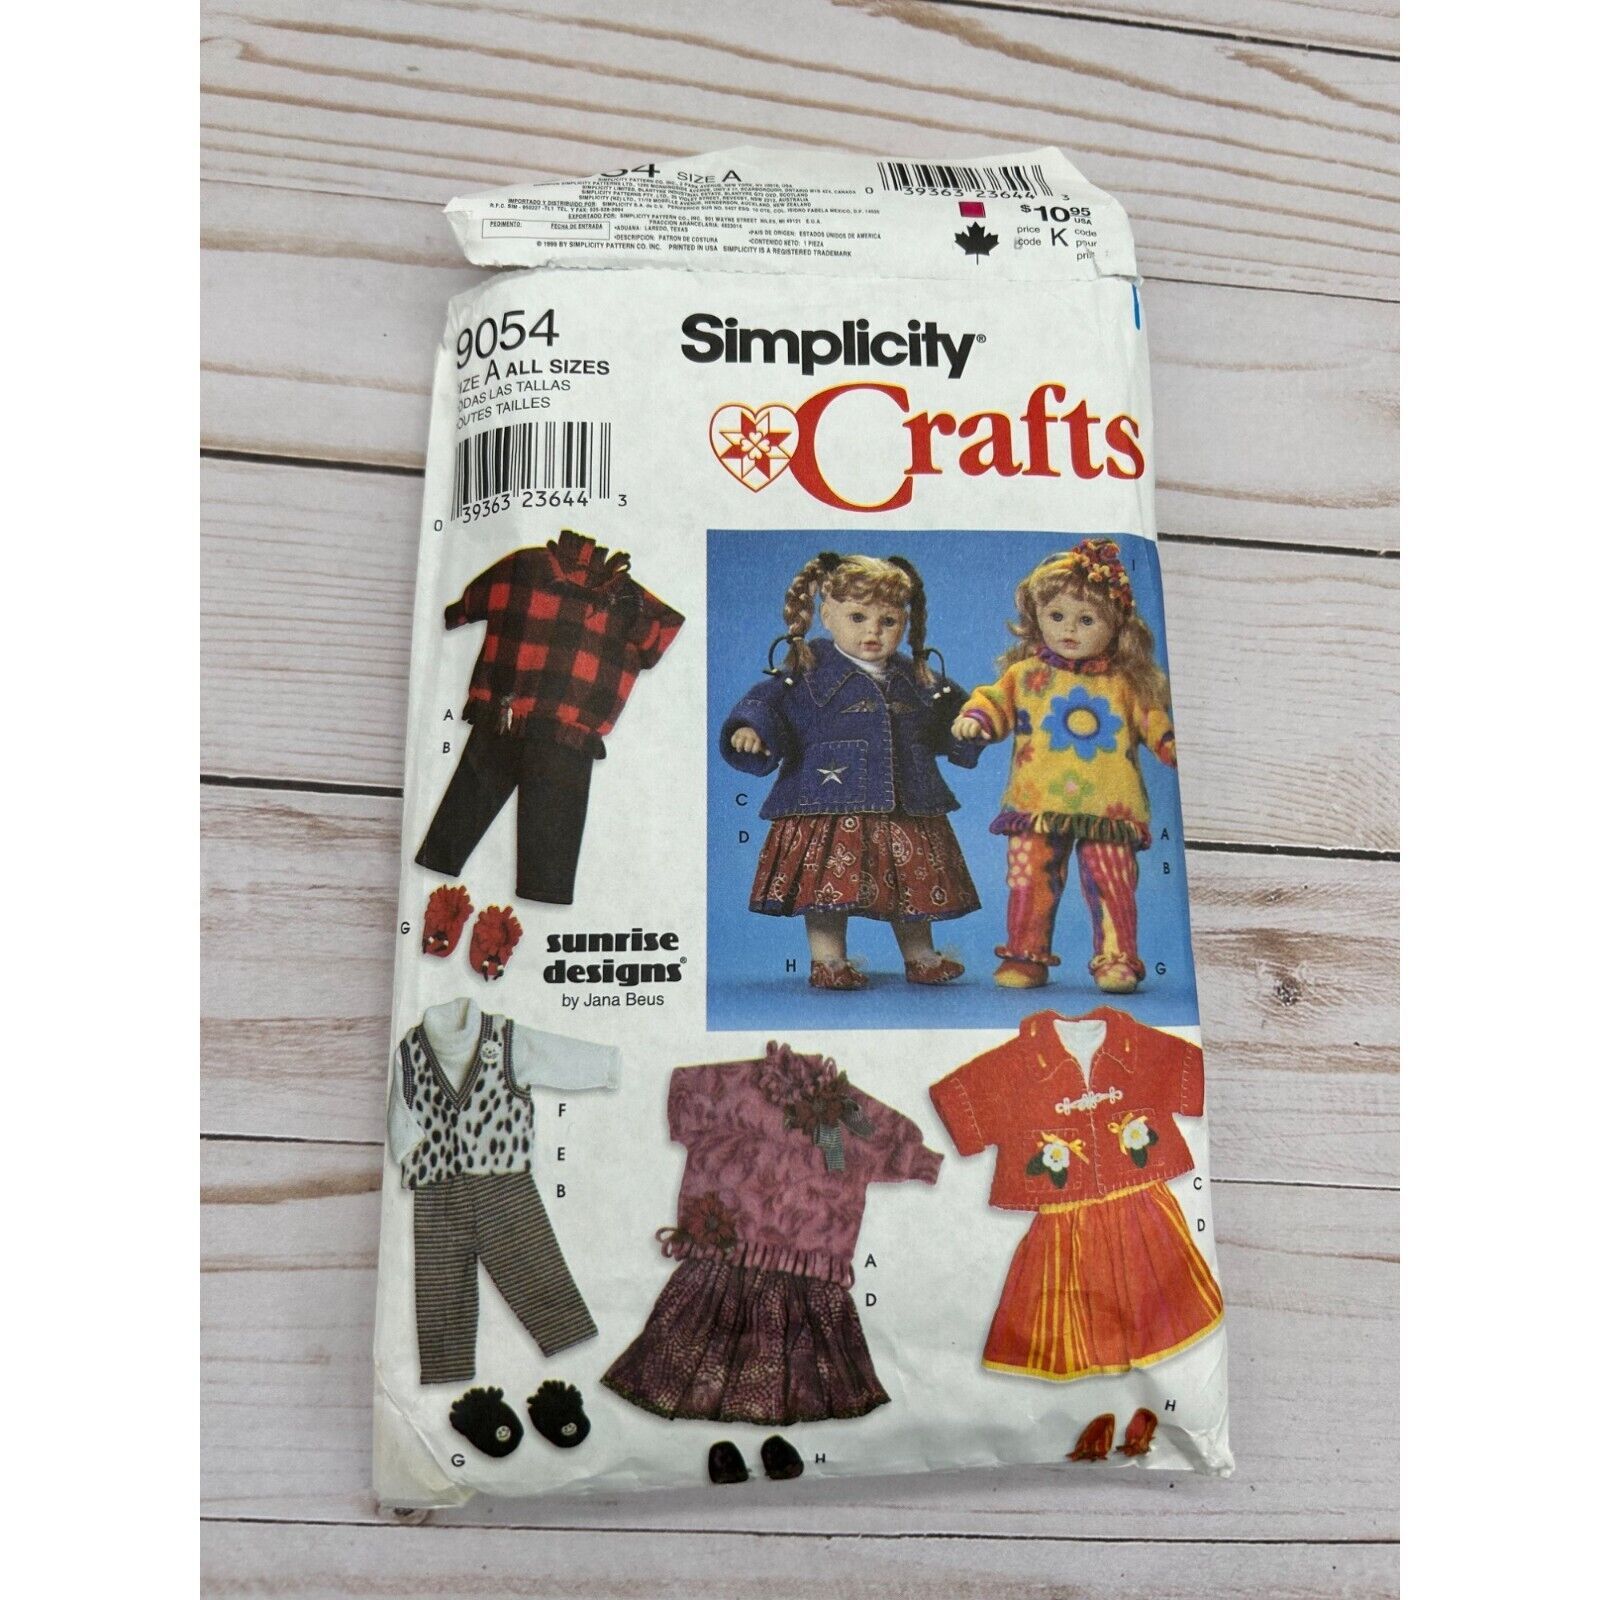 Simplicity Crafts 9054 Doll Clothes Pattern 1999 Uncut 20" 22" 23" Dolls - $8.59